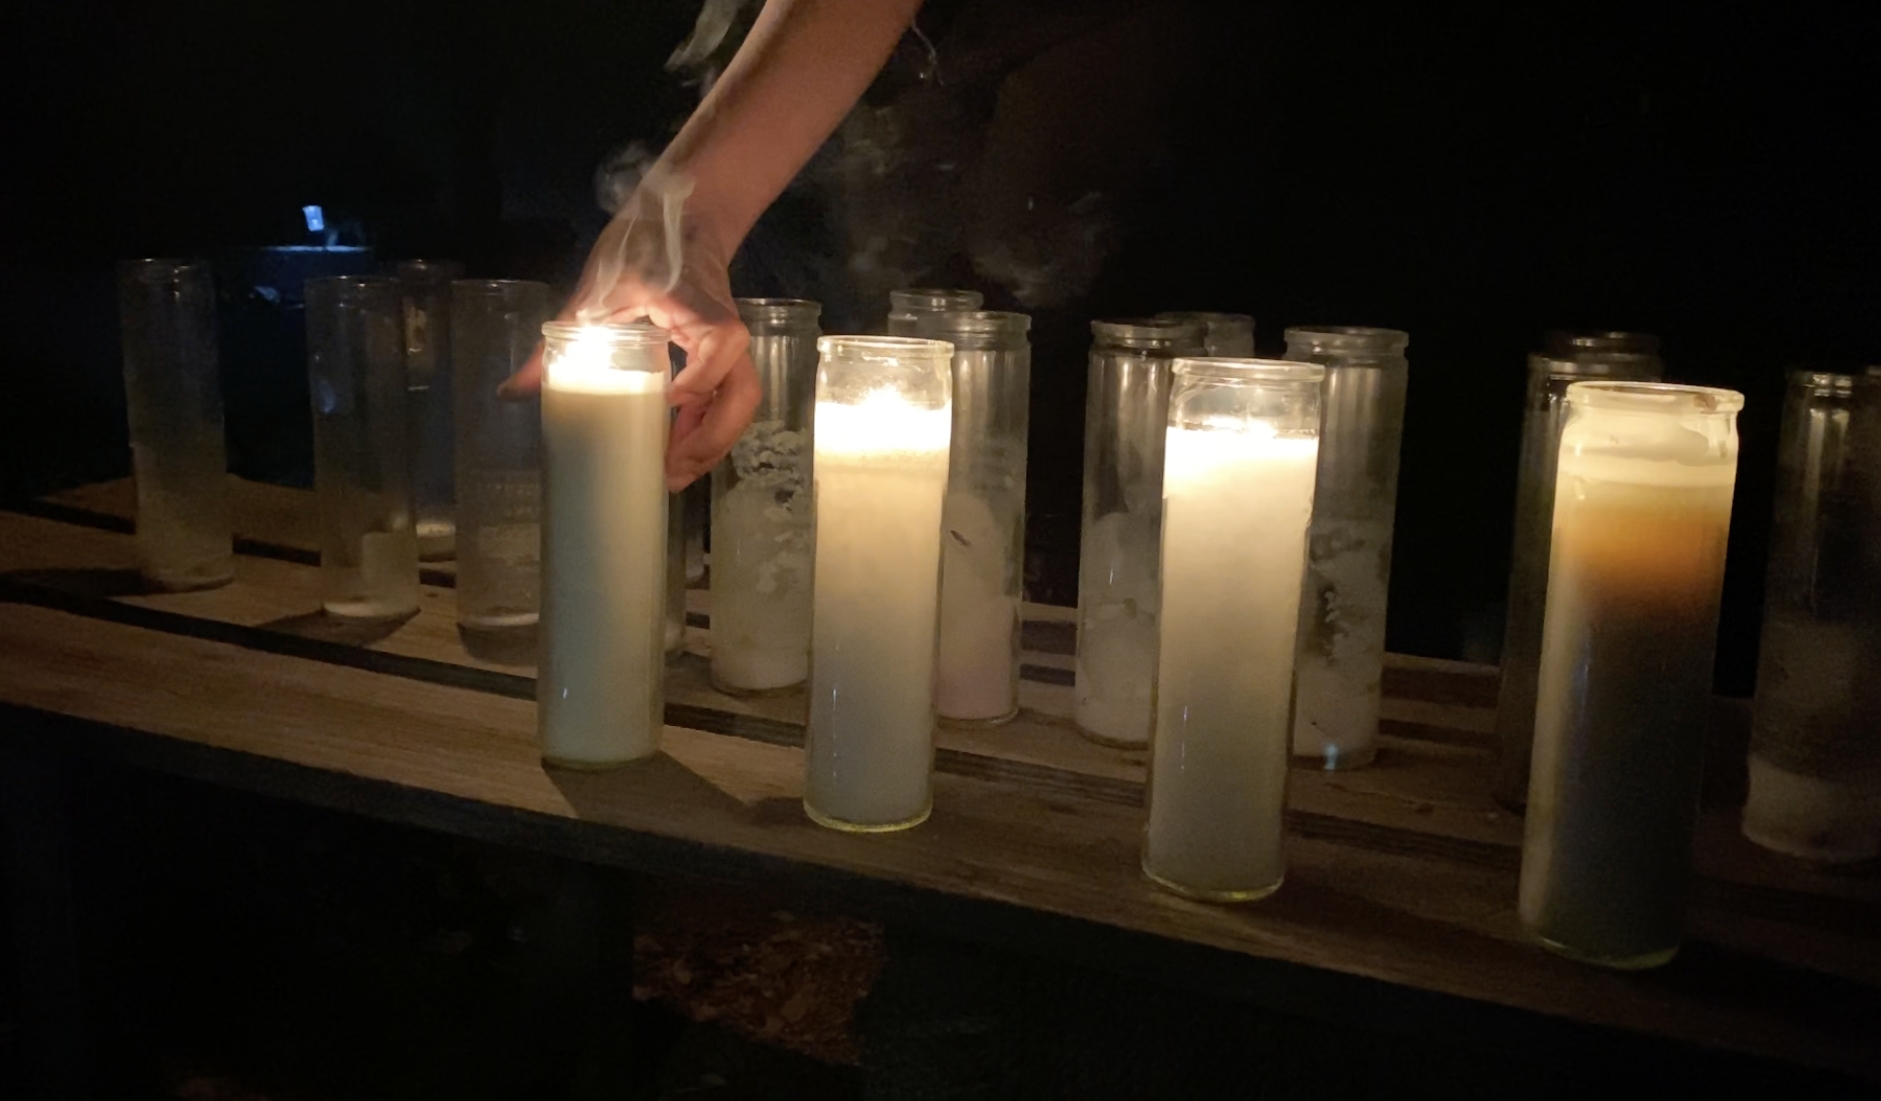 Prayer candles being lit one by one